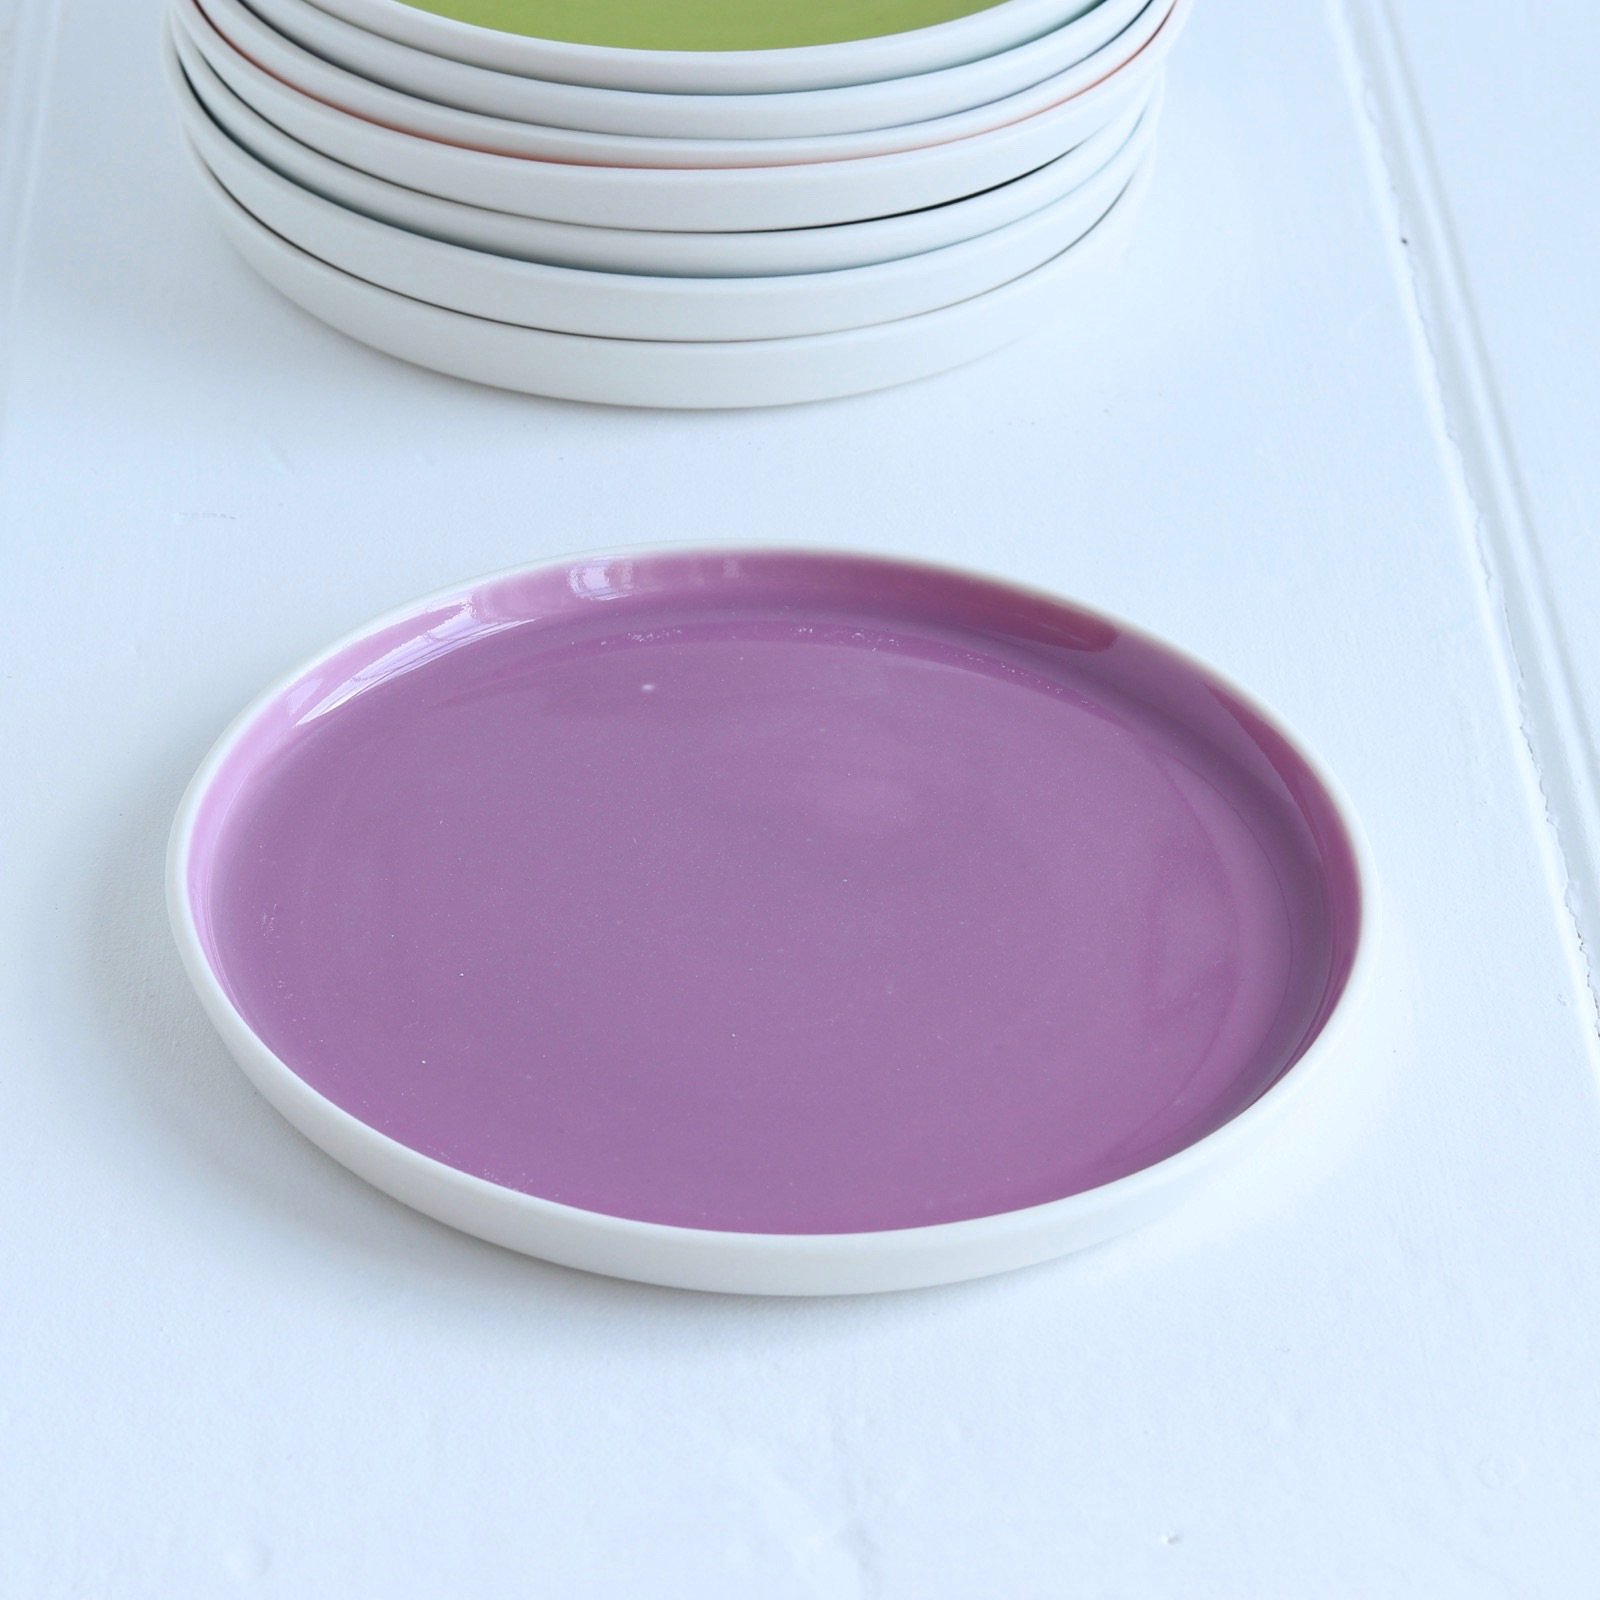 More plates in production this week, along with two shapes of jugs. But the tea plates really are the pieces I most enjoy using - I think it&rsquo;s the big block of colour I enjoy.
.
.
.
#teaplate #sideplate #porcelainplate #handmadeplate #Contempor